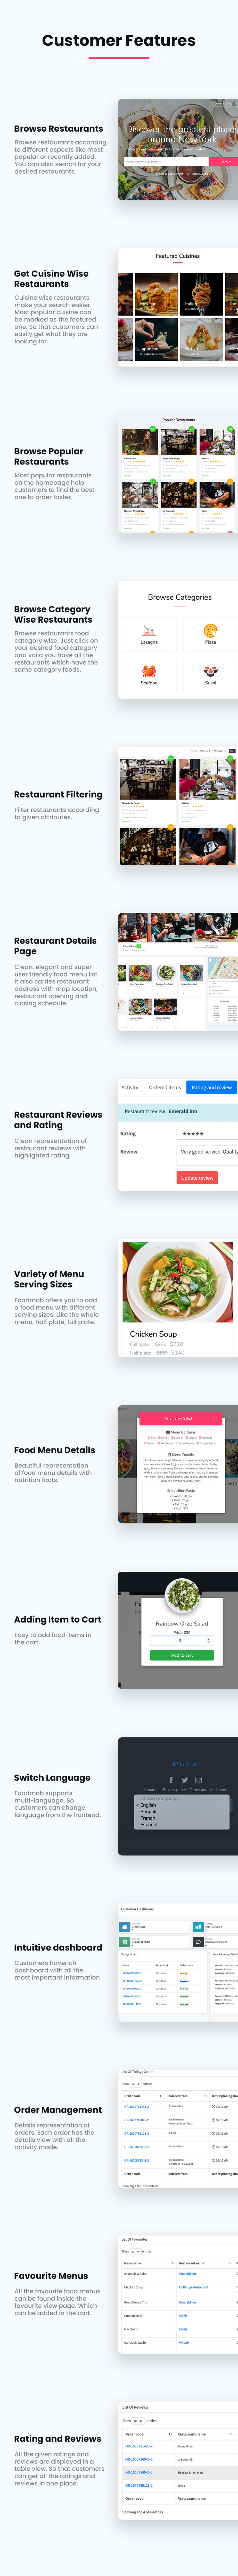 FoodMob - An Online Multi Restaurant Food Ordering and Management with Delivery System - 7